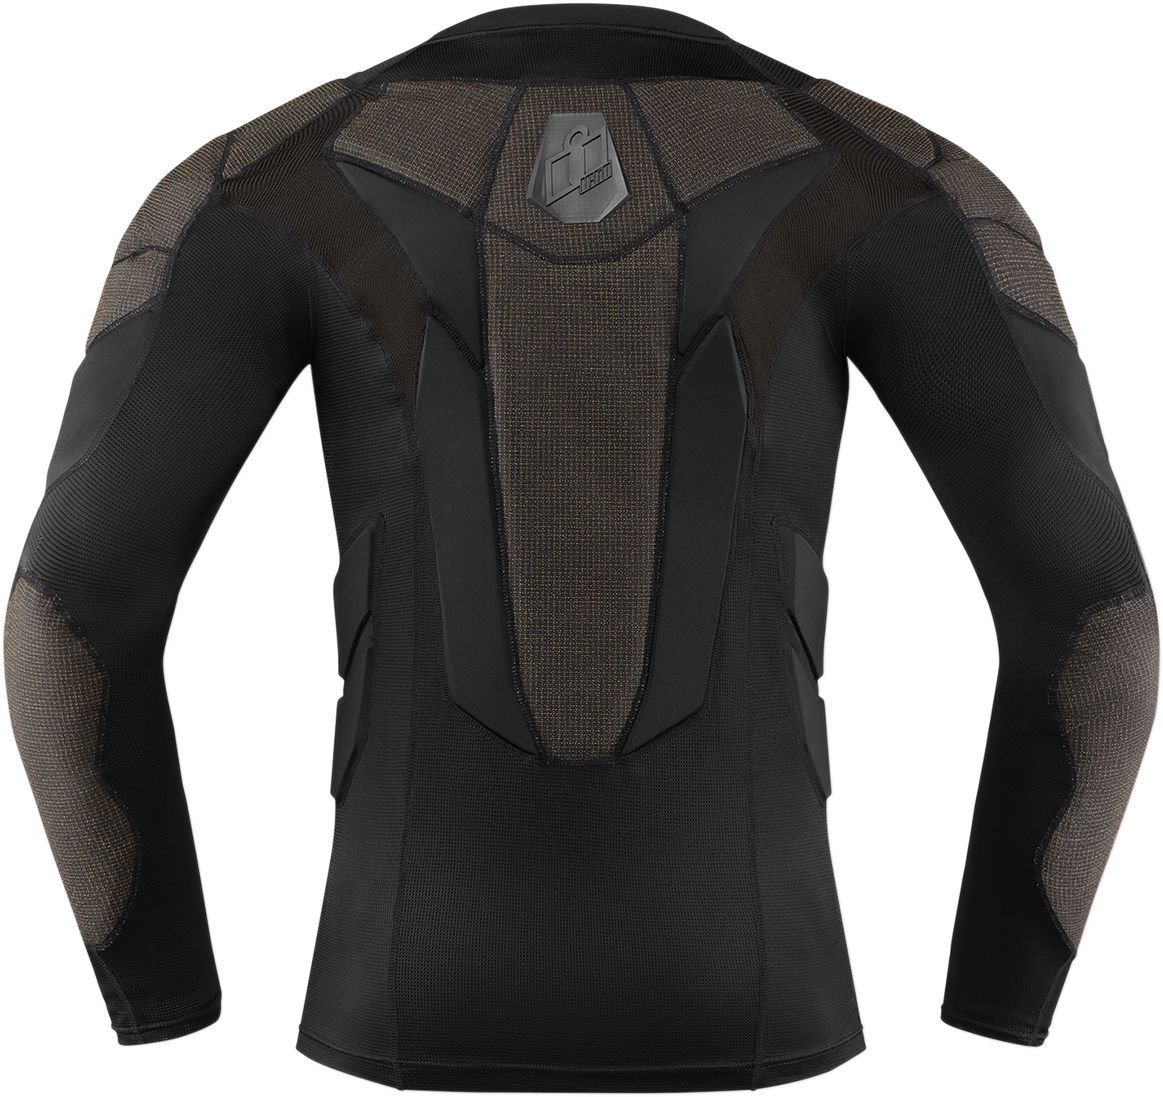 ICON Field Armor™ Compression Shirt - Black - Large 2701-0989